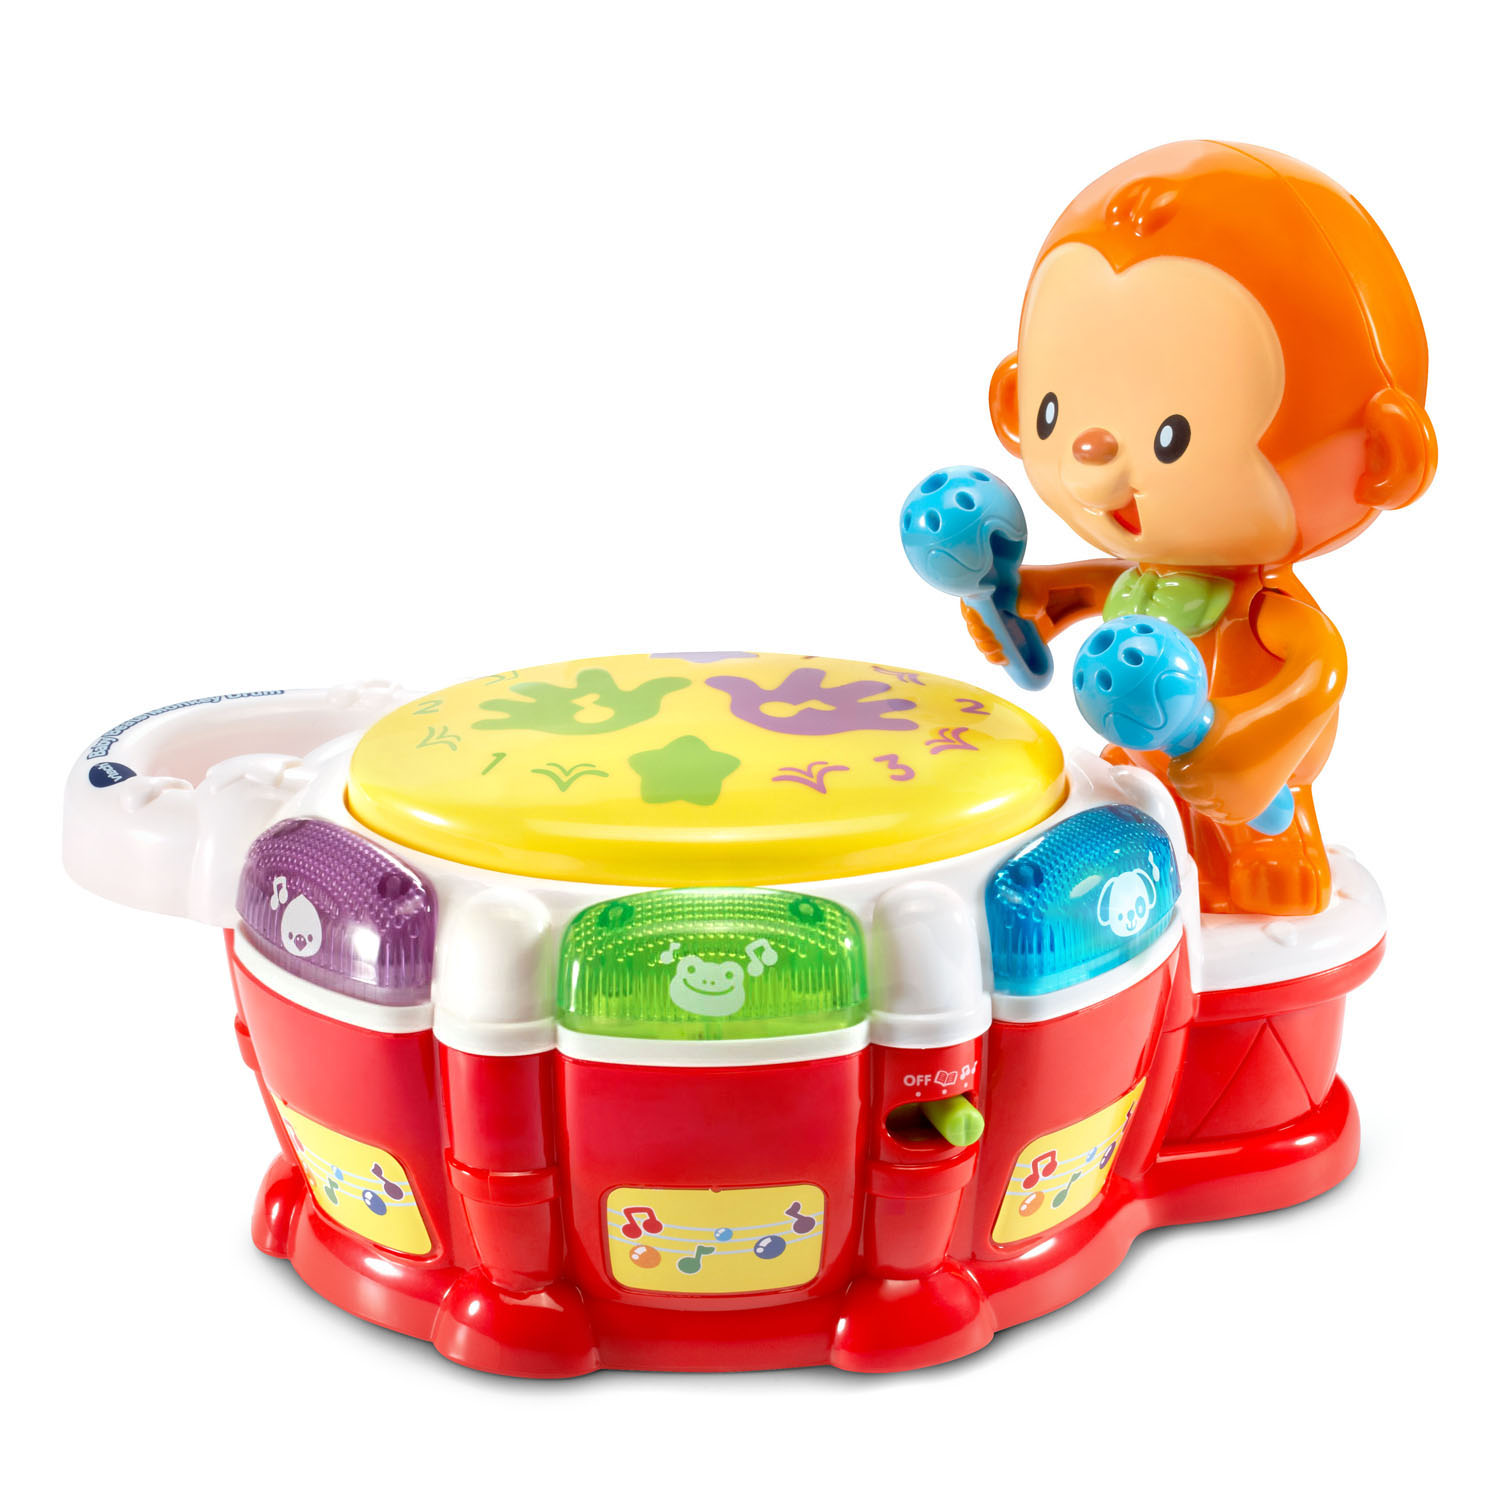 VTech Baby Beats Monkey Drum, Fun Animated Music Toy for Infant - image 5 of 9